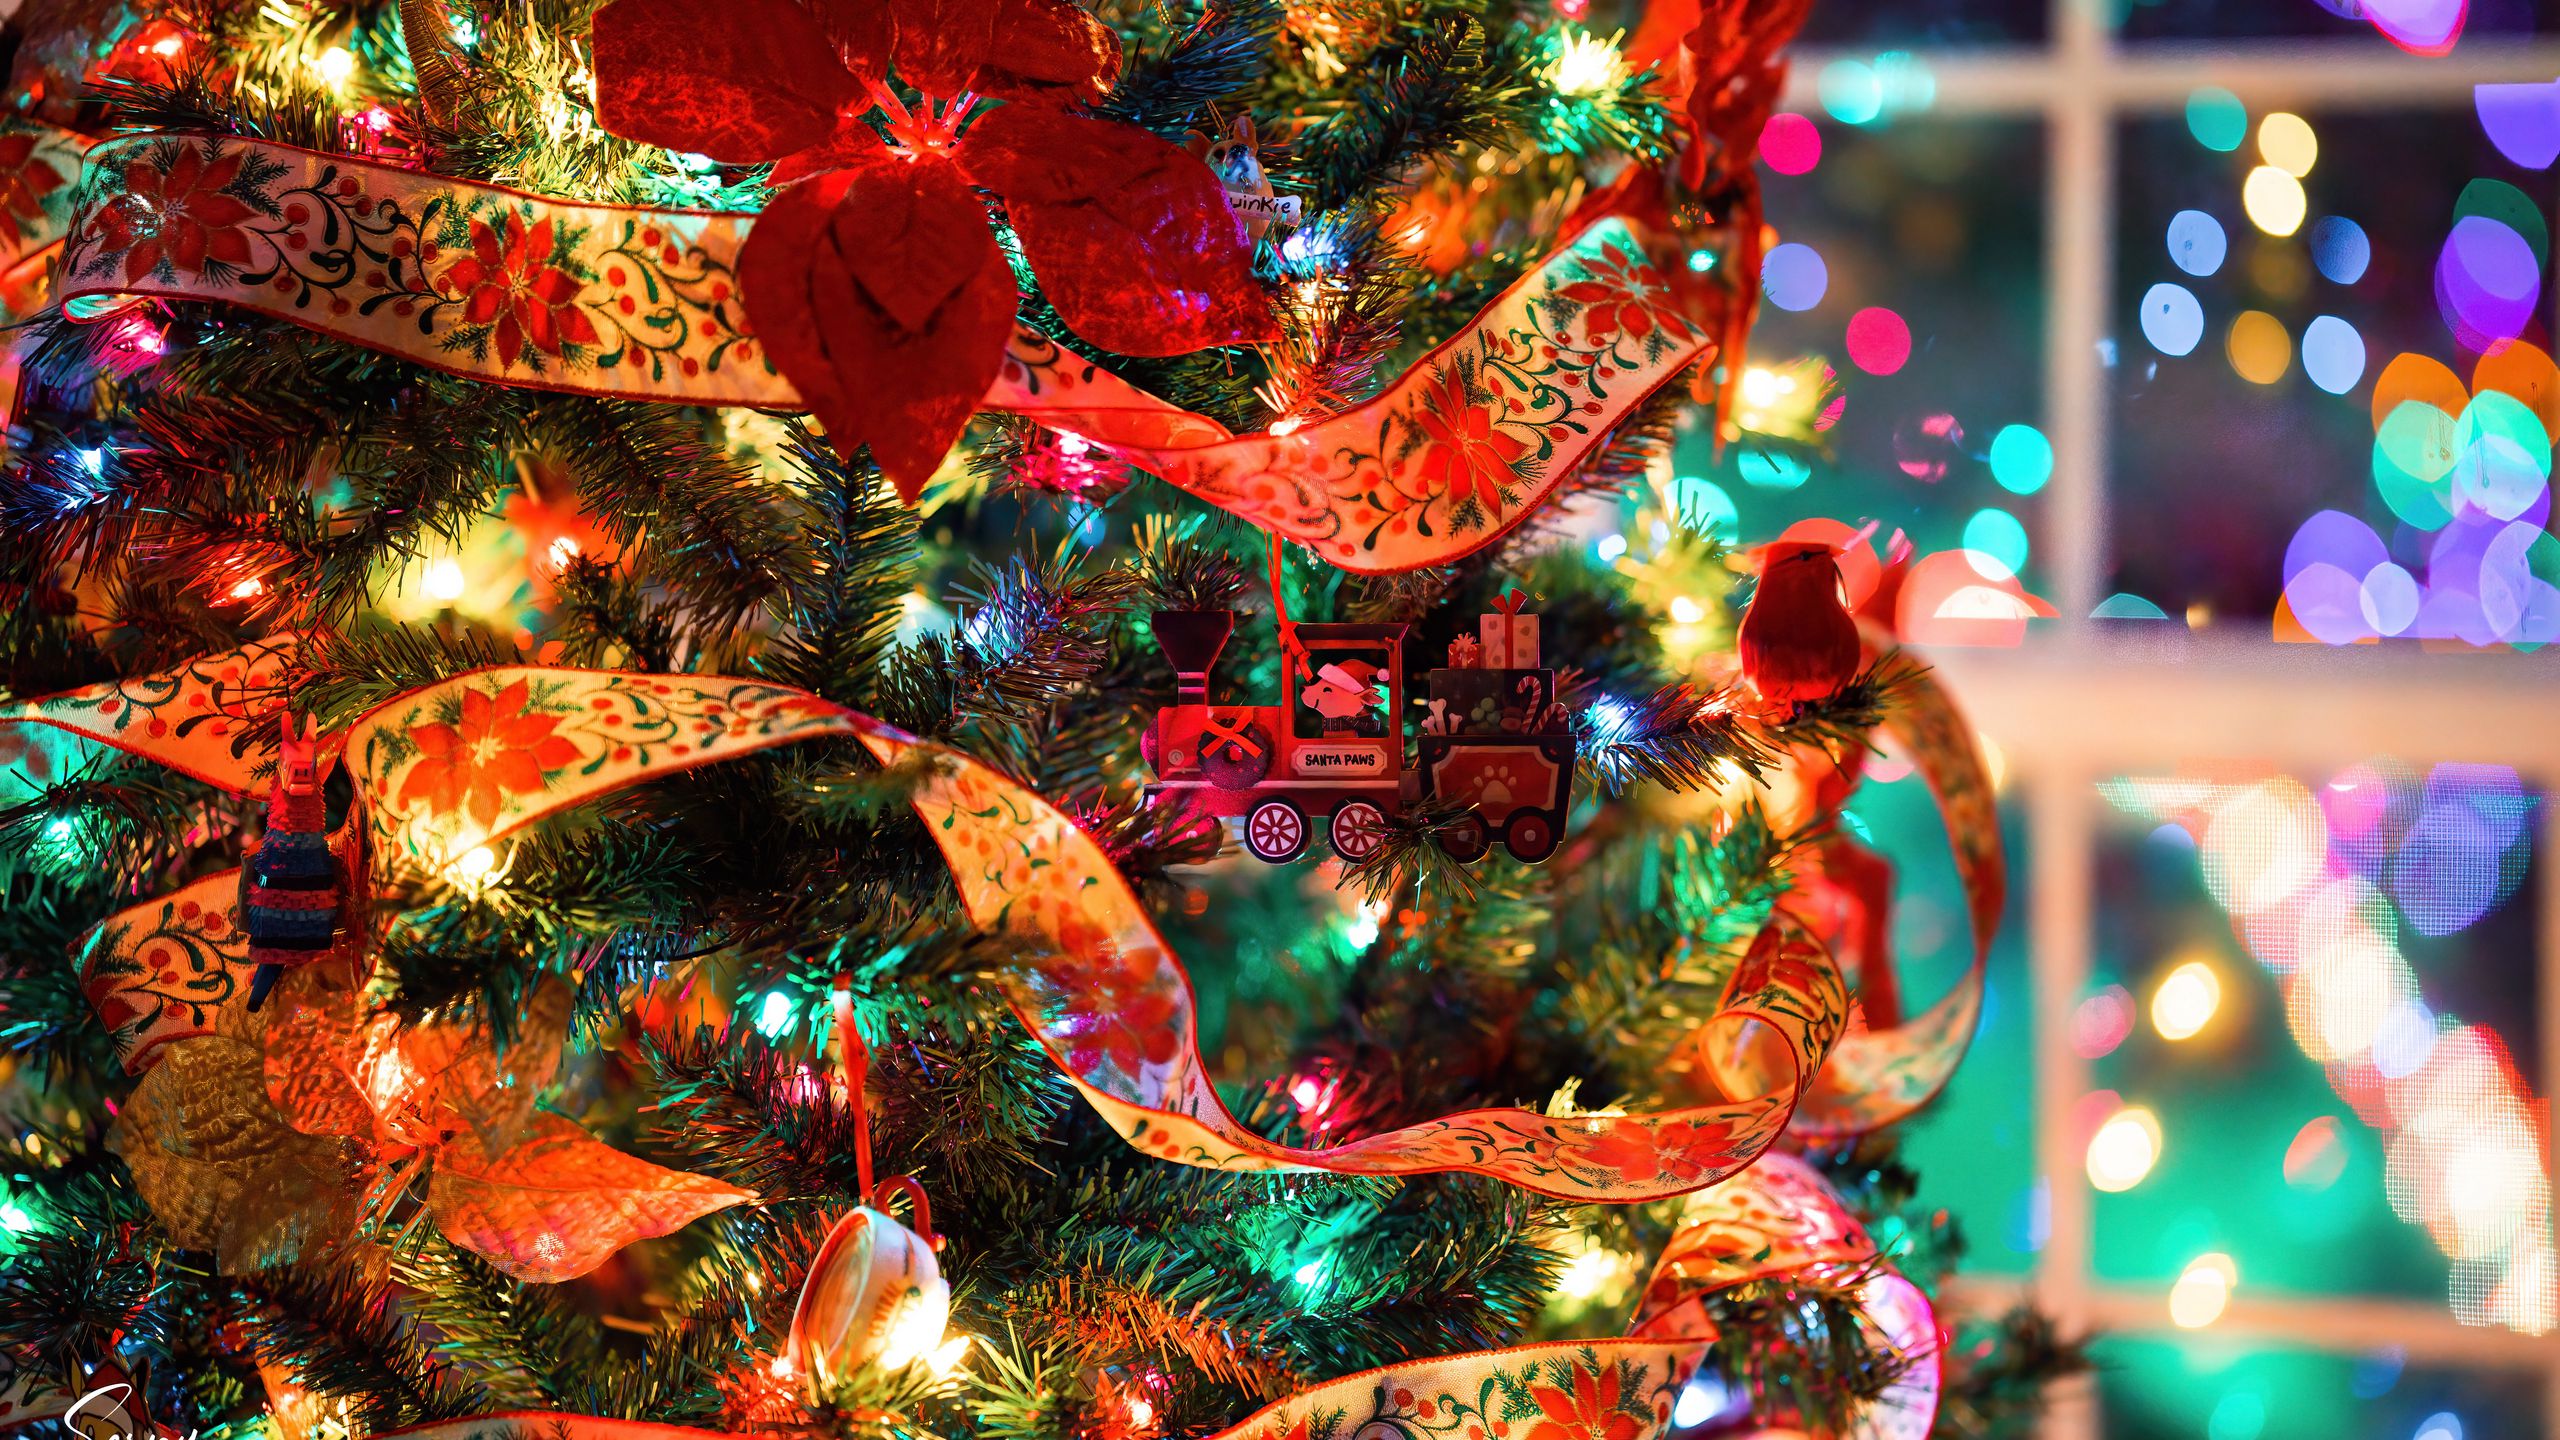 Free download Download wallpaper 2560x1440 christmas tree decorations ...